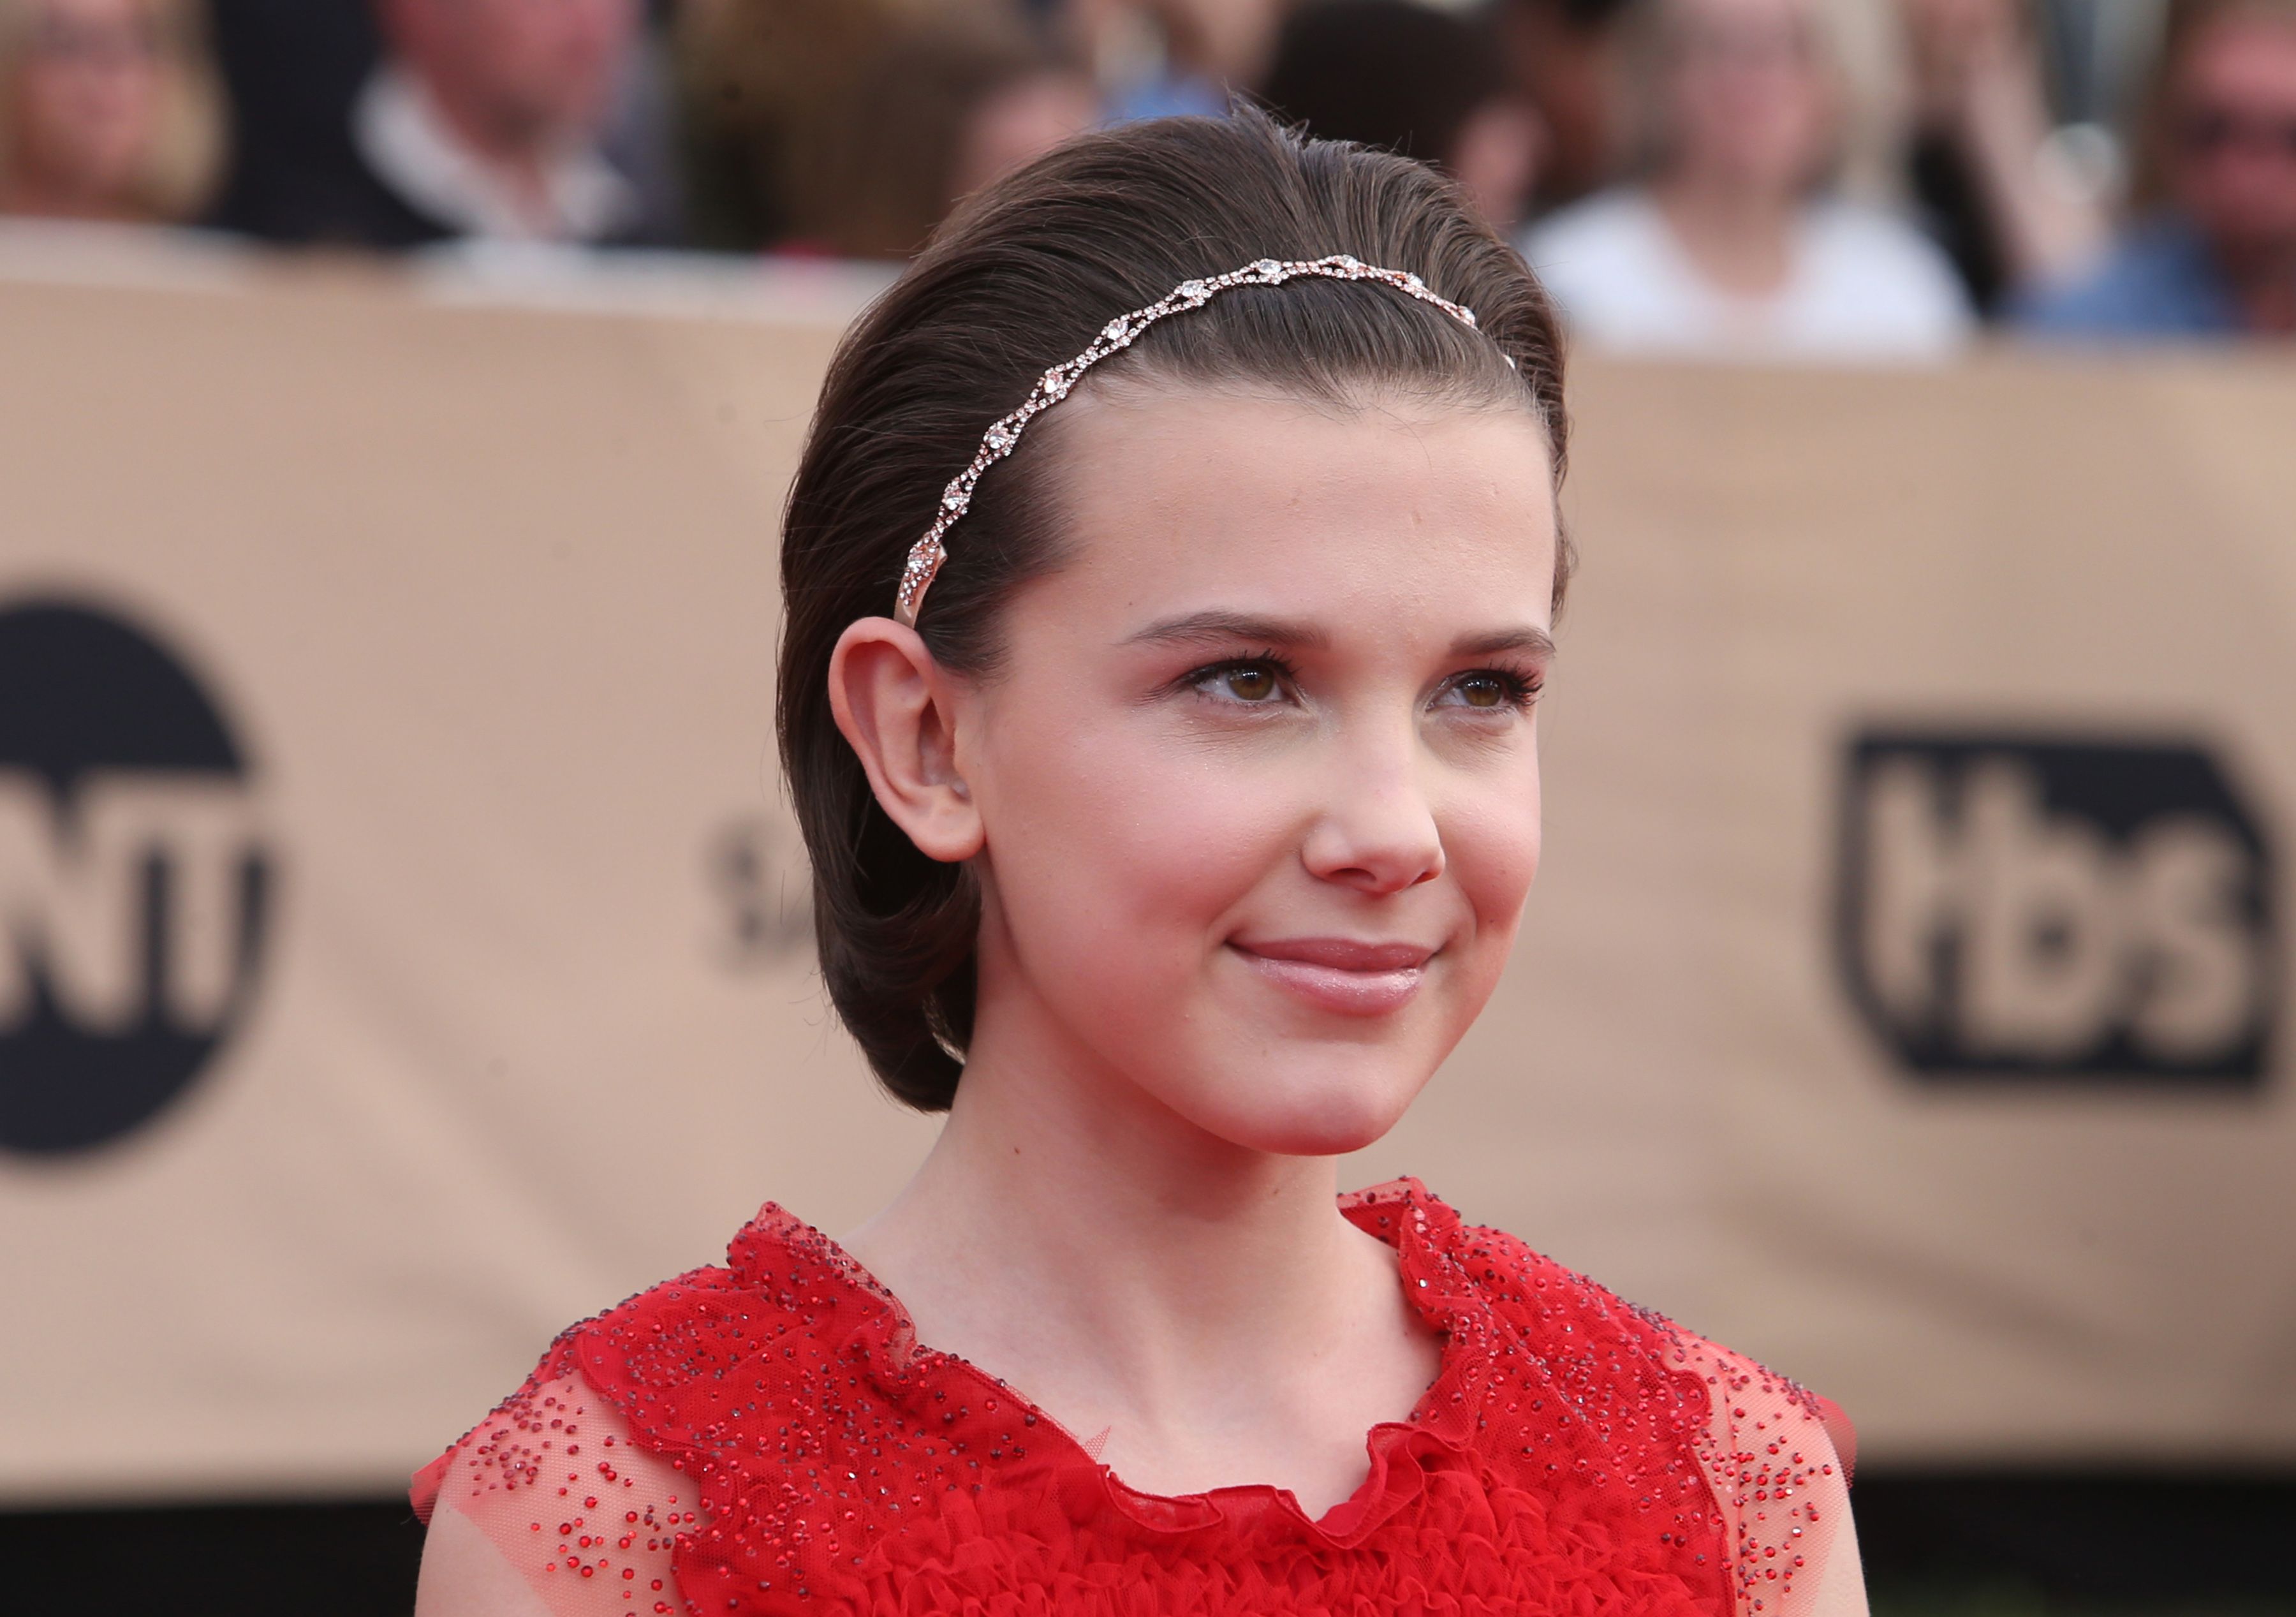 Millie Bobby Brown Reached 11 Million Followers On Instagram